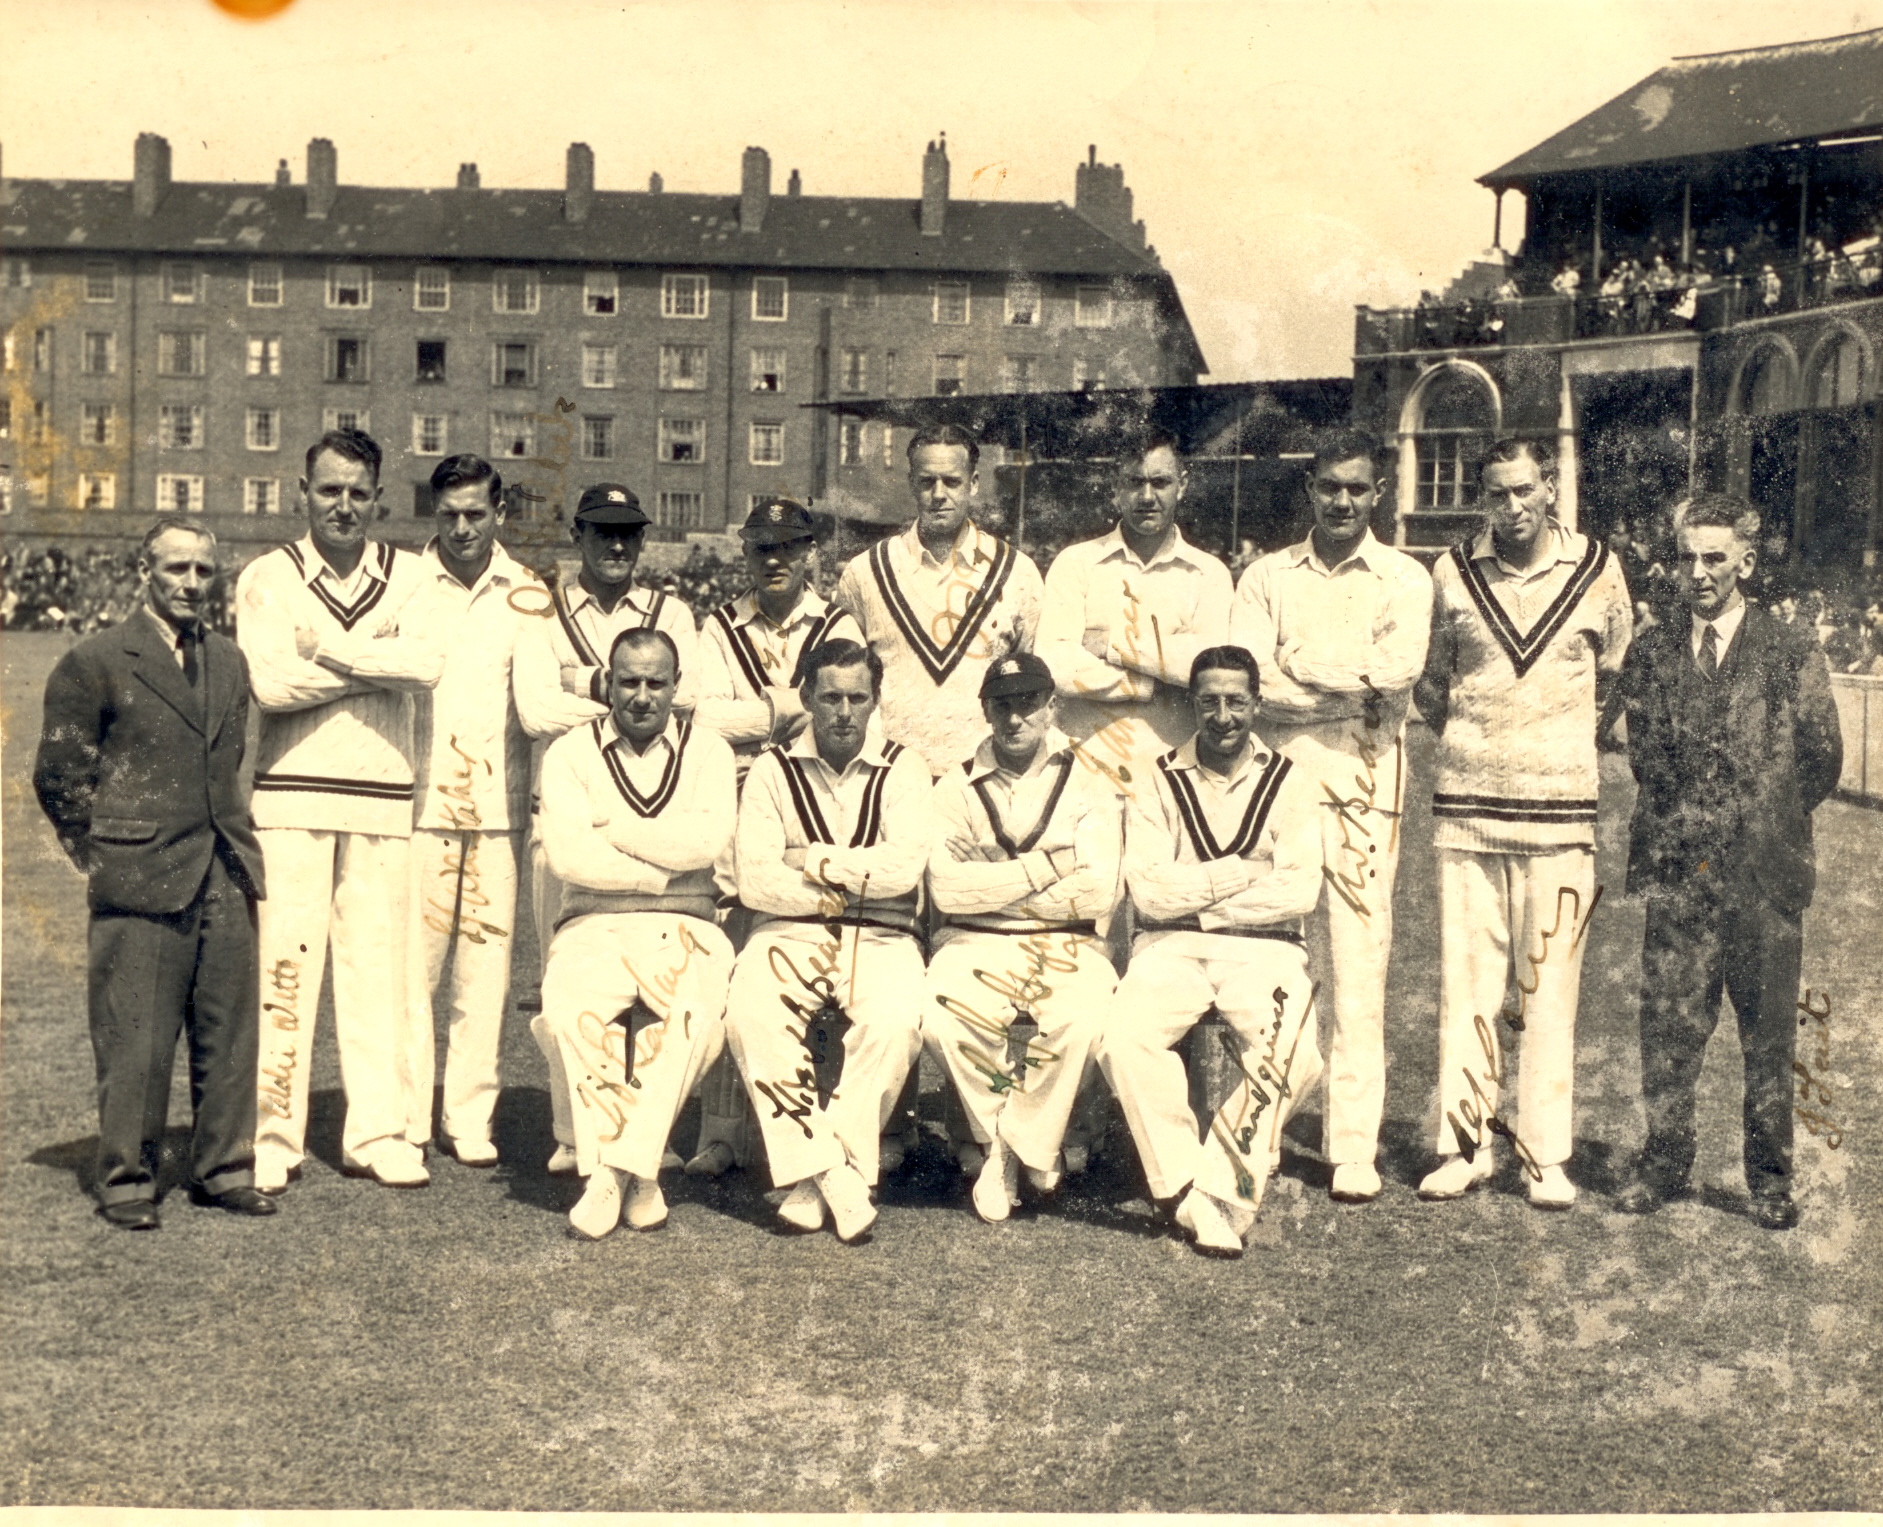 Looking back to 1945: Surrey & The Oval